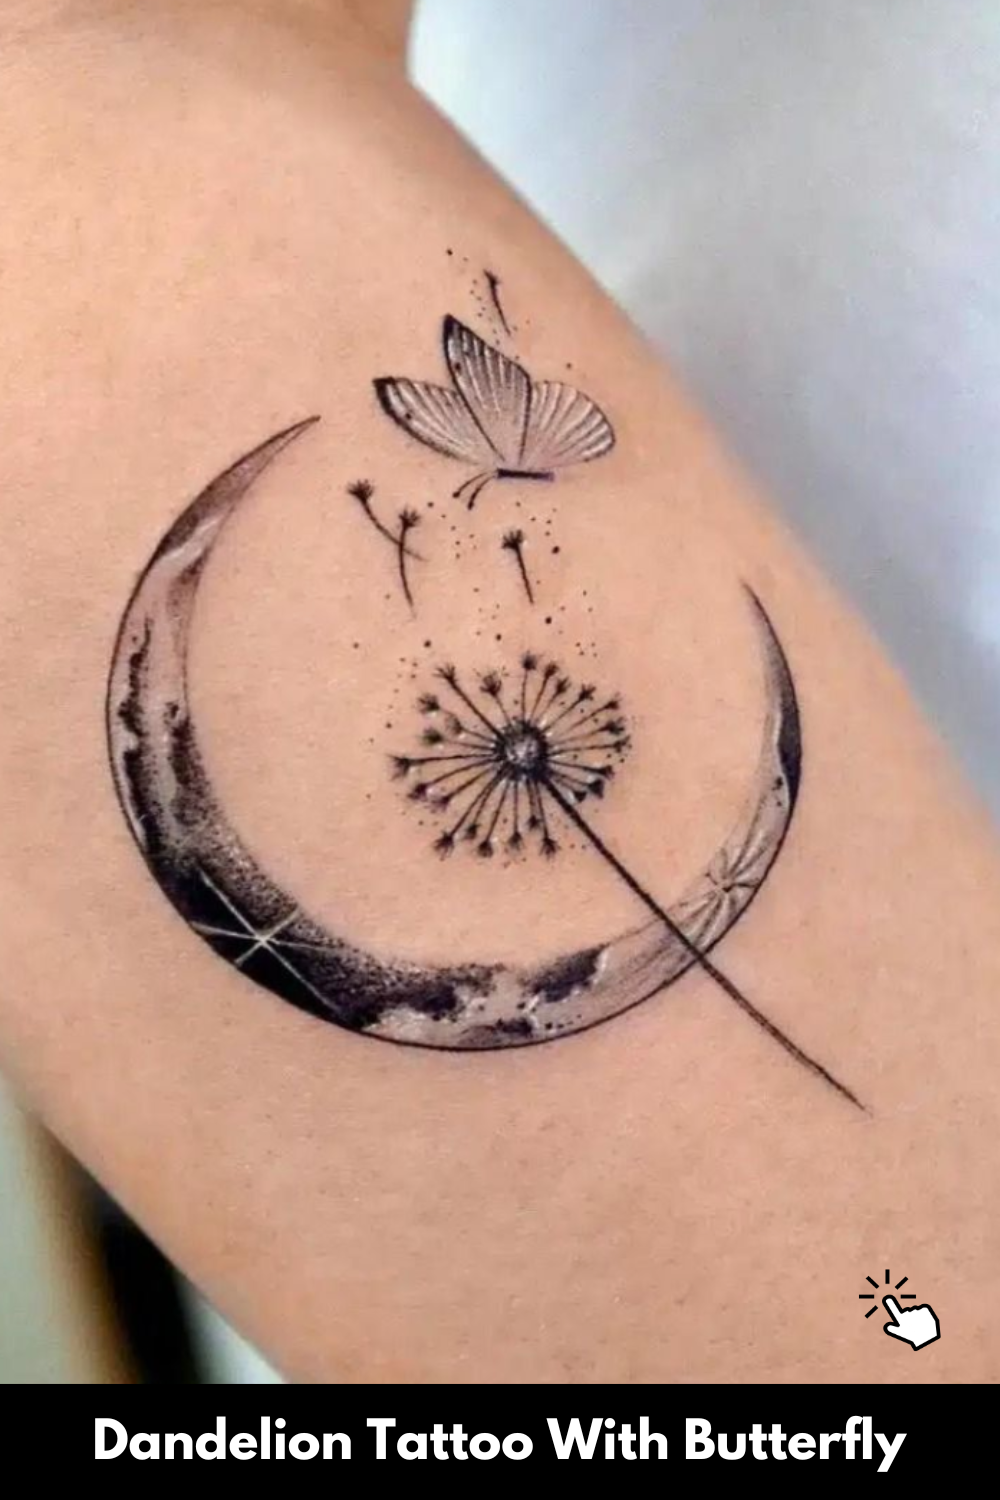 Dandelion-tattoo-with-butterfly